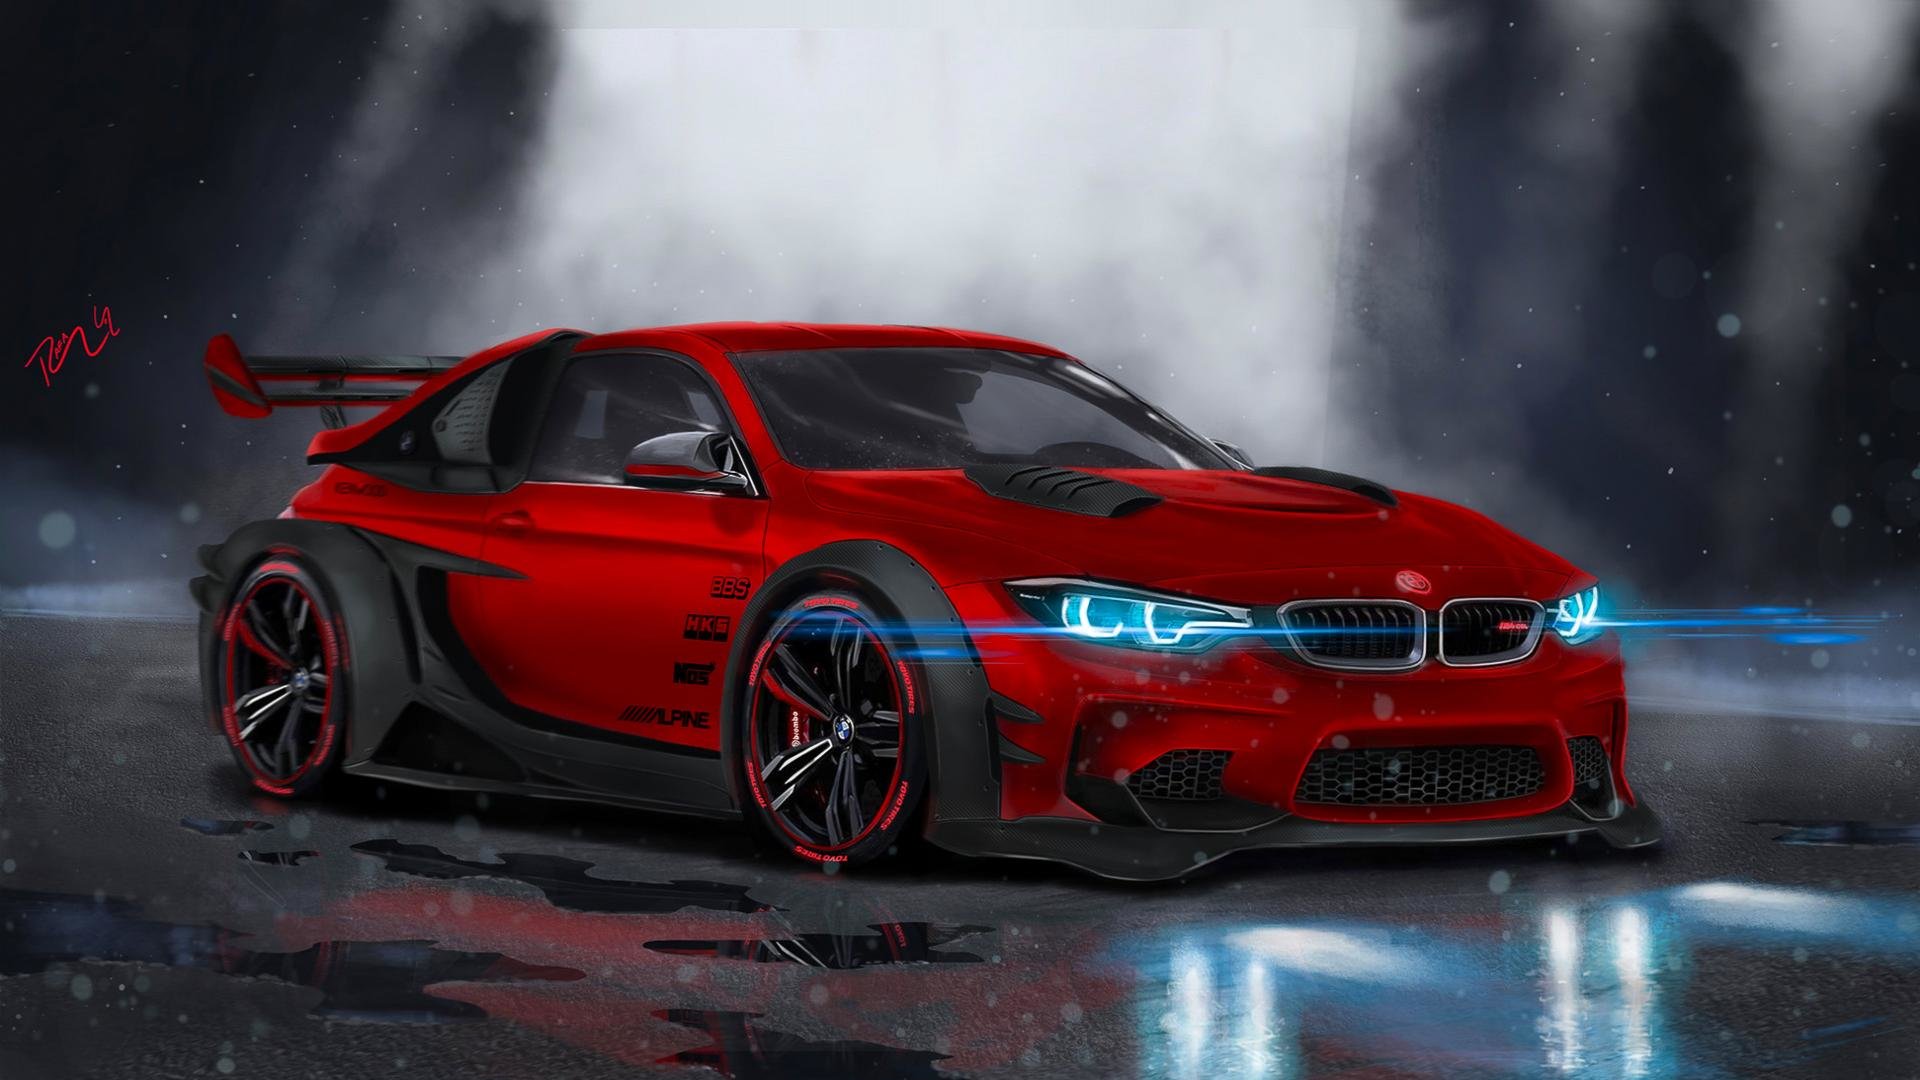 Awesome BMW M4 free background ID:275672 for hd 1920x1080 computer